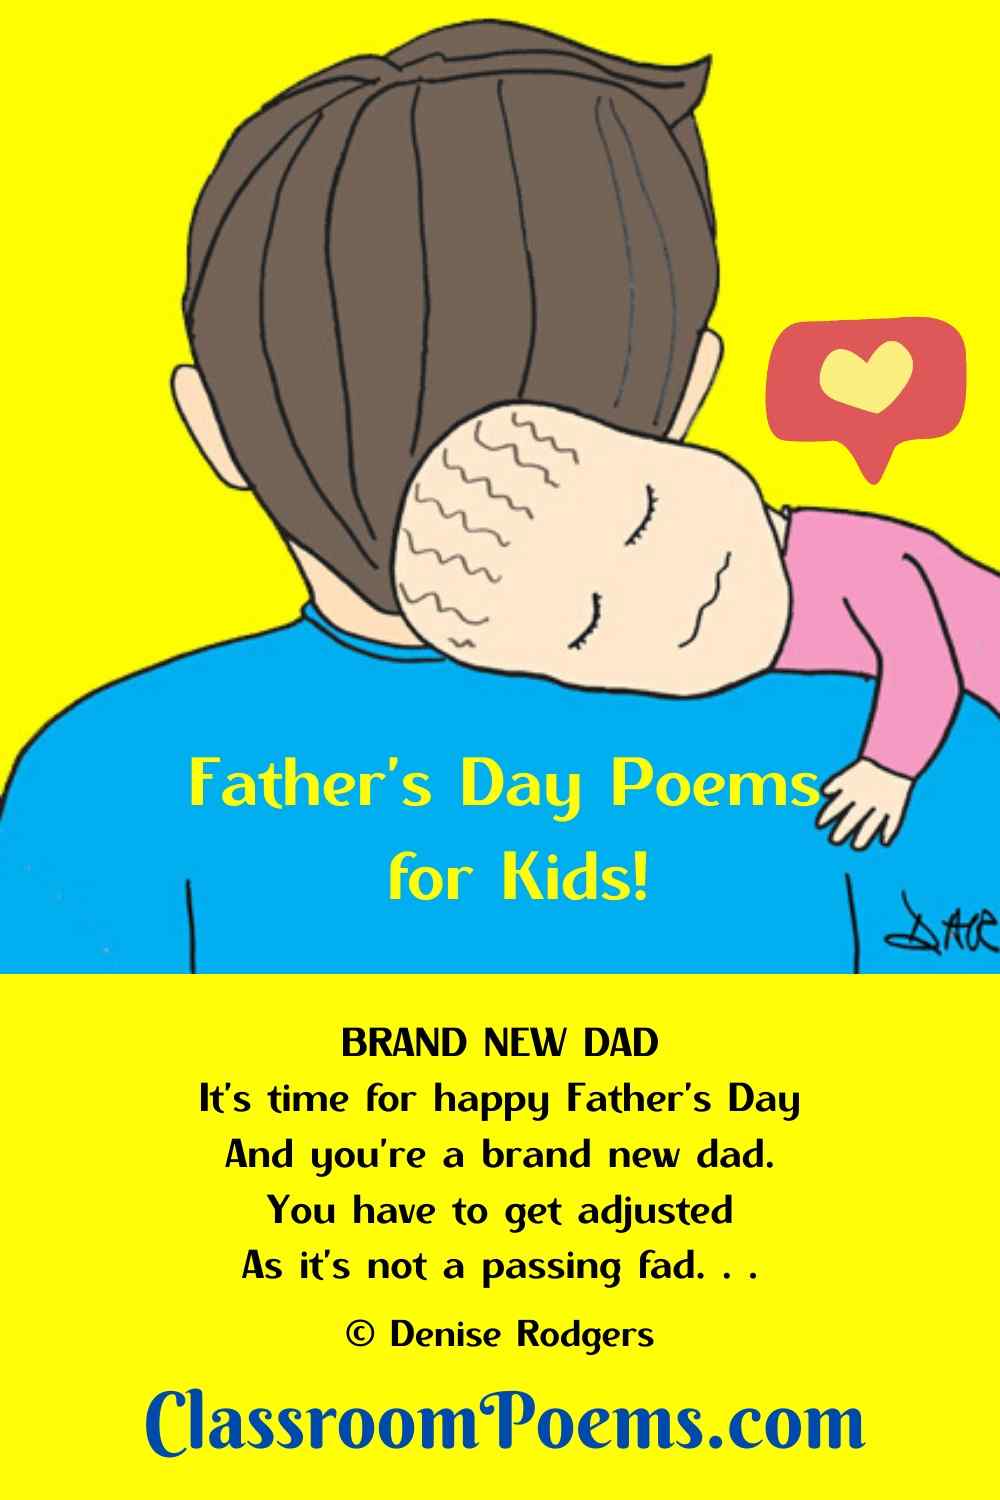 Father and newborn Father's Day poem for kids by Denise Rodgers on ClassroomPoems.com.